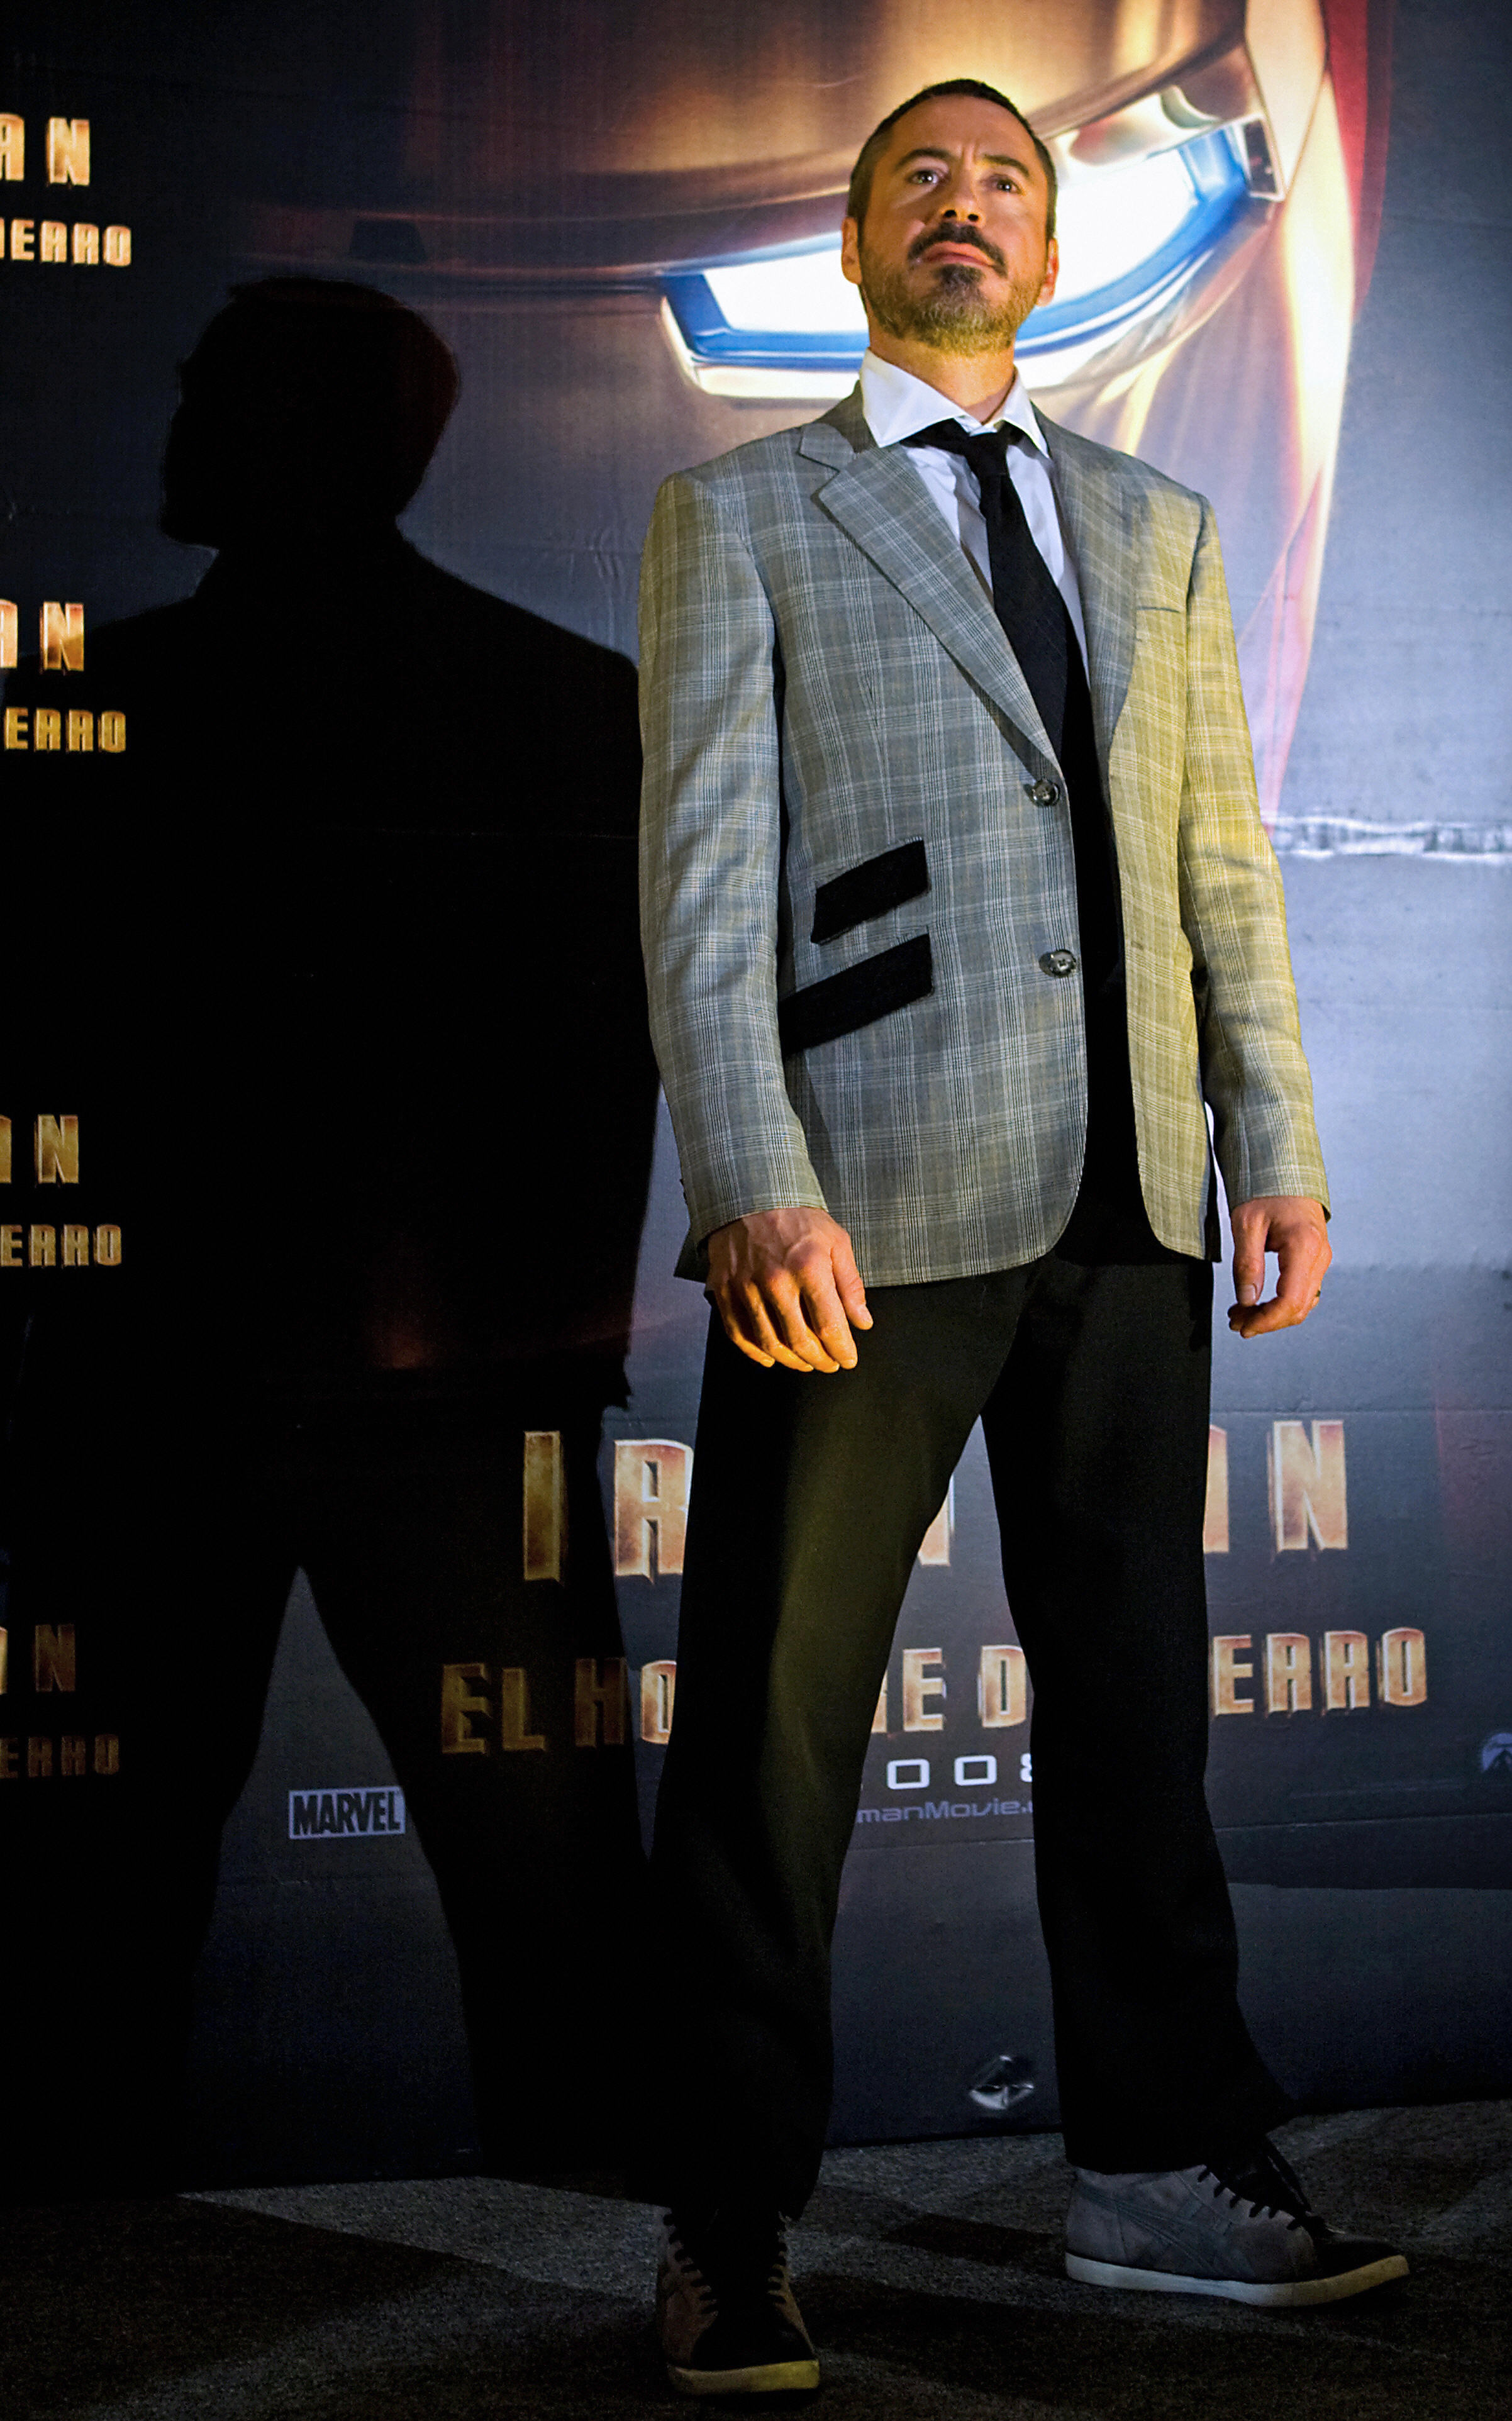 Robert Downey Jr. during the premiere of "Iron Man" in Mexico City on April 9, 2008 | Source: Getty Images